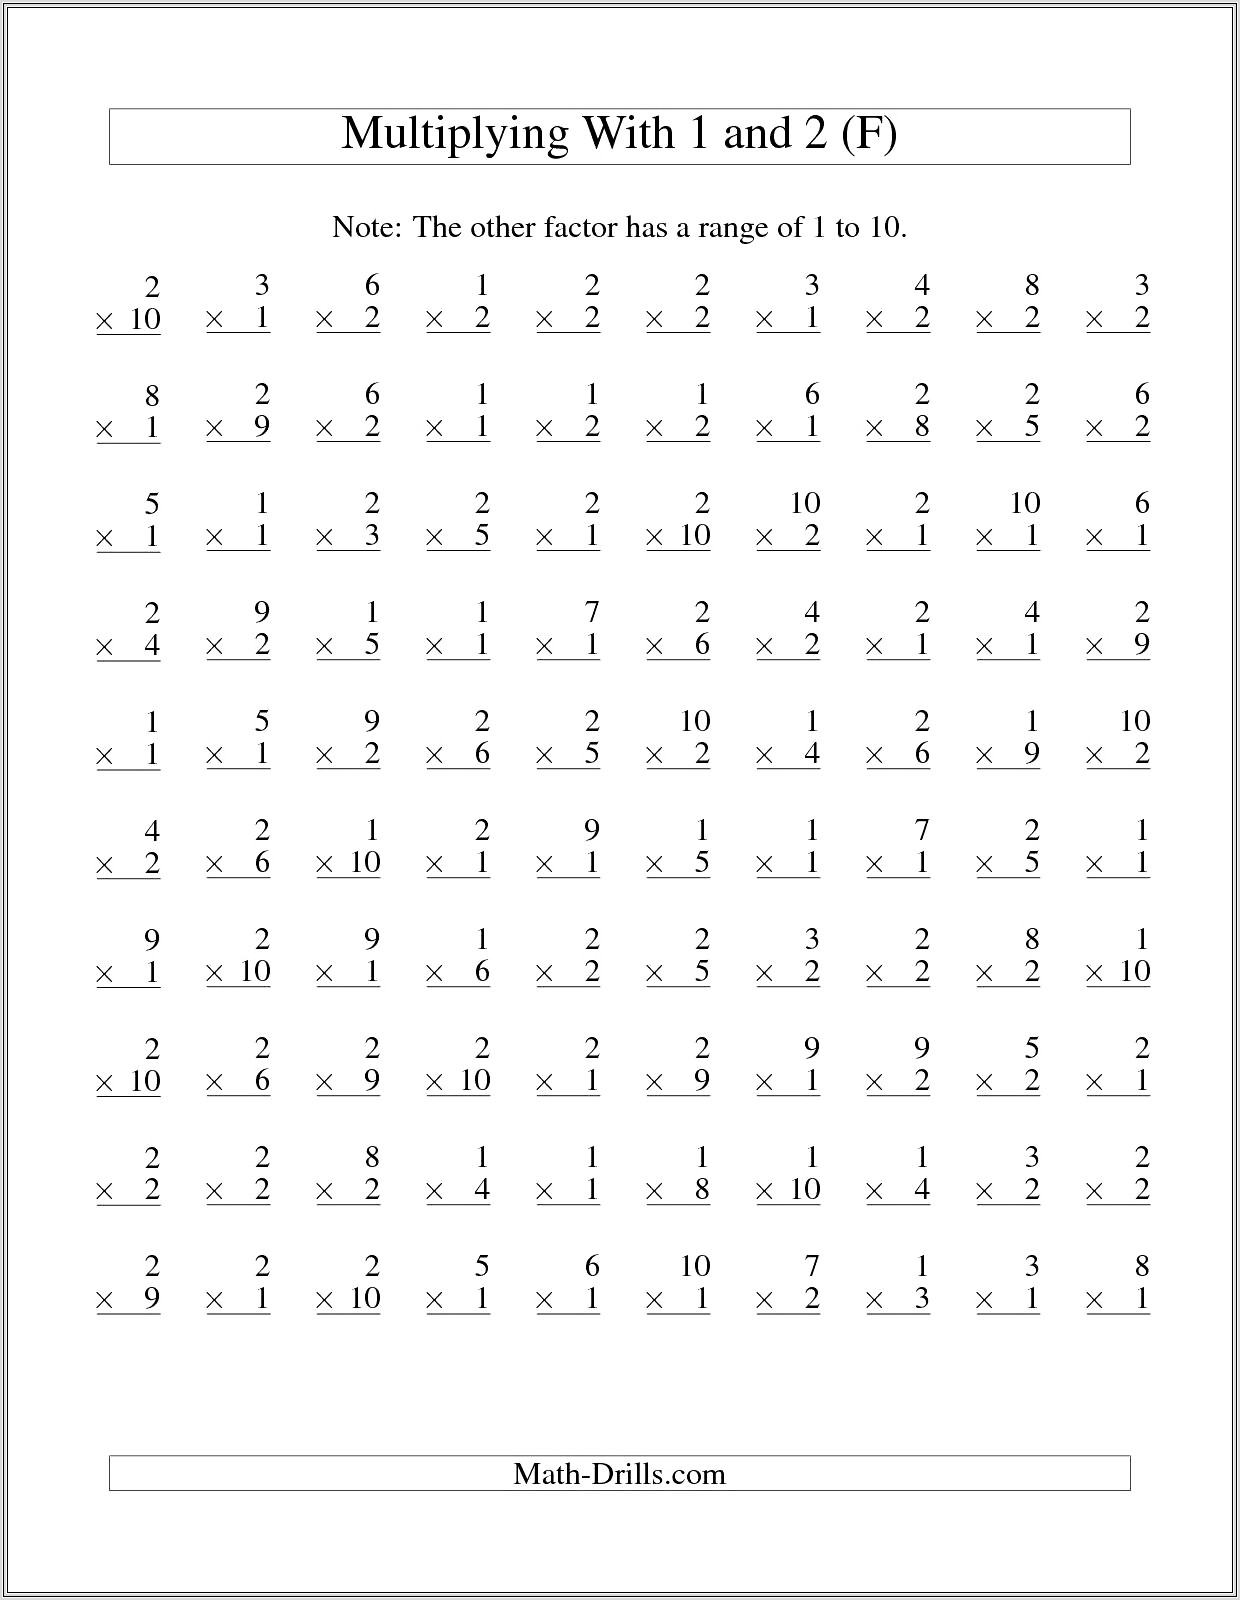 100 Times Table Problems